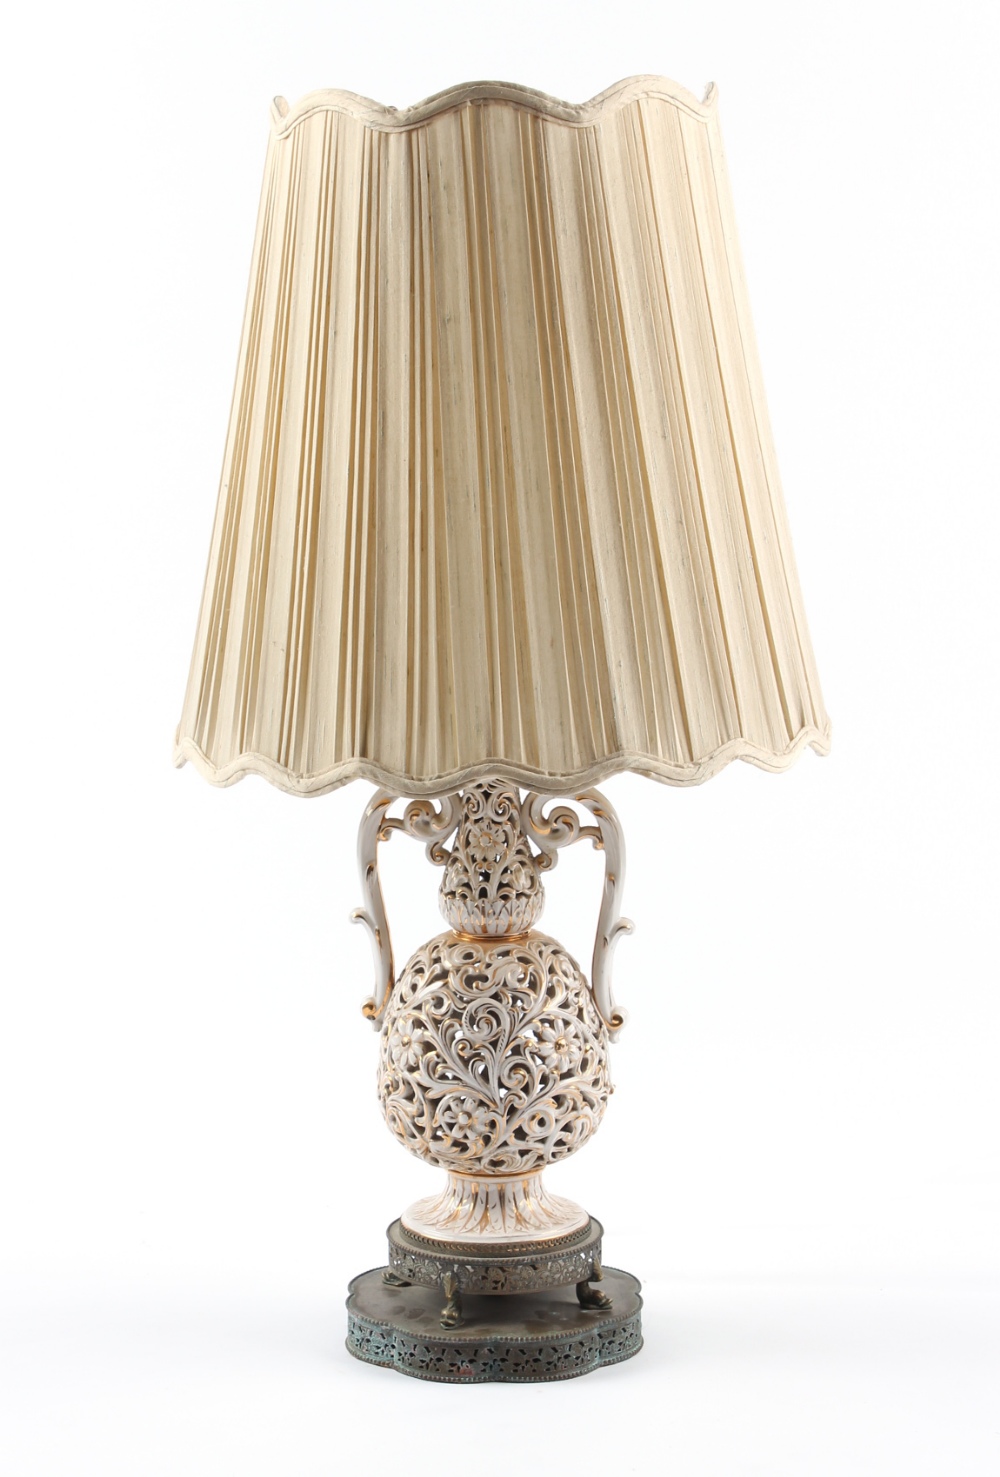 Property of a lady - a large gilt decorated white glazed ceramic table lamp, with pierced brass